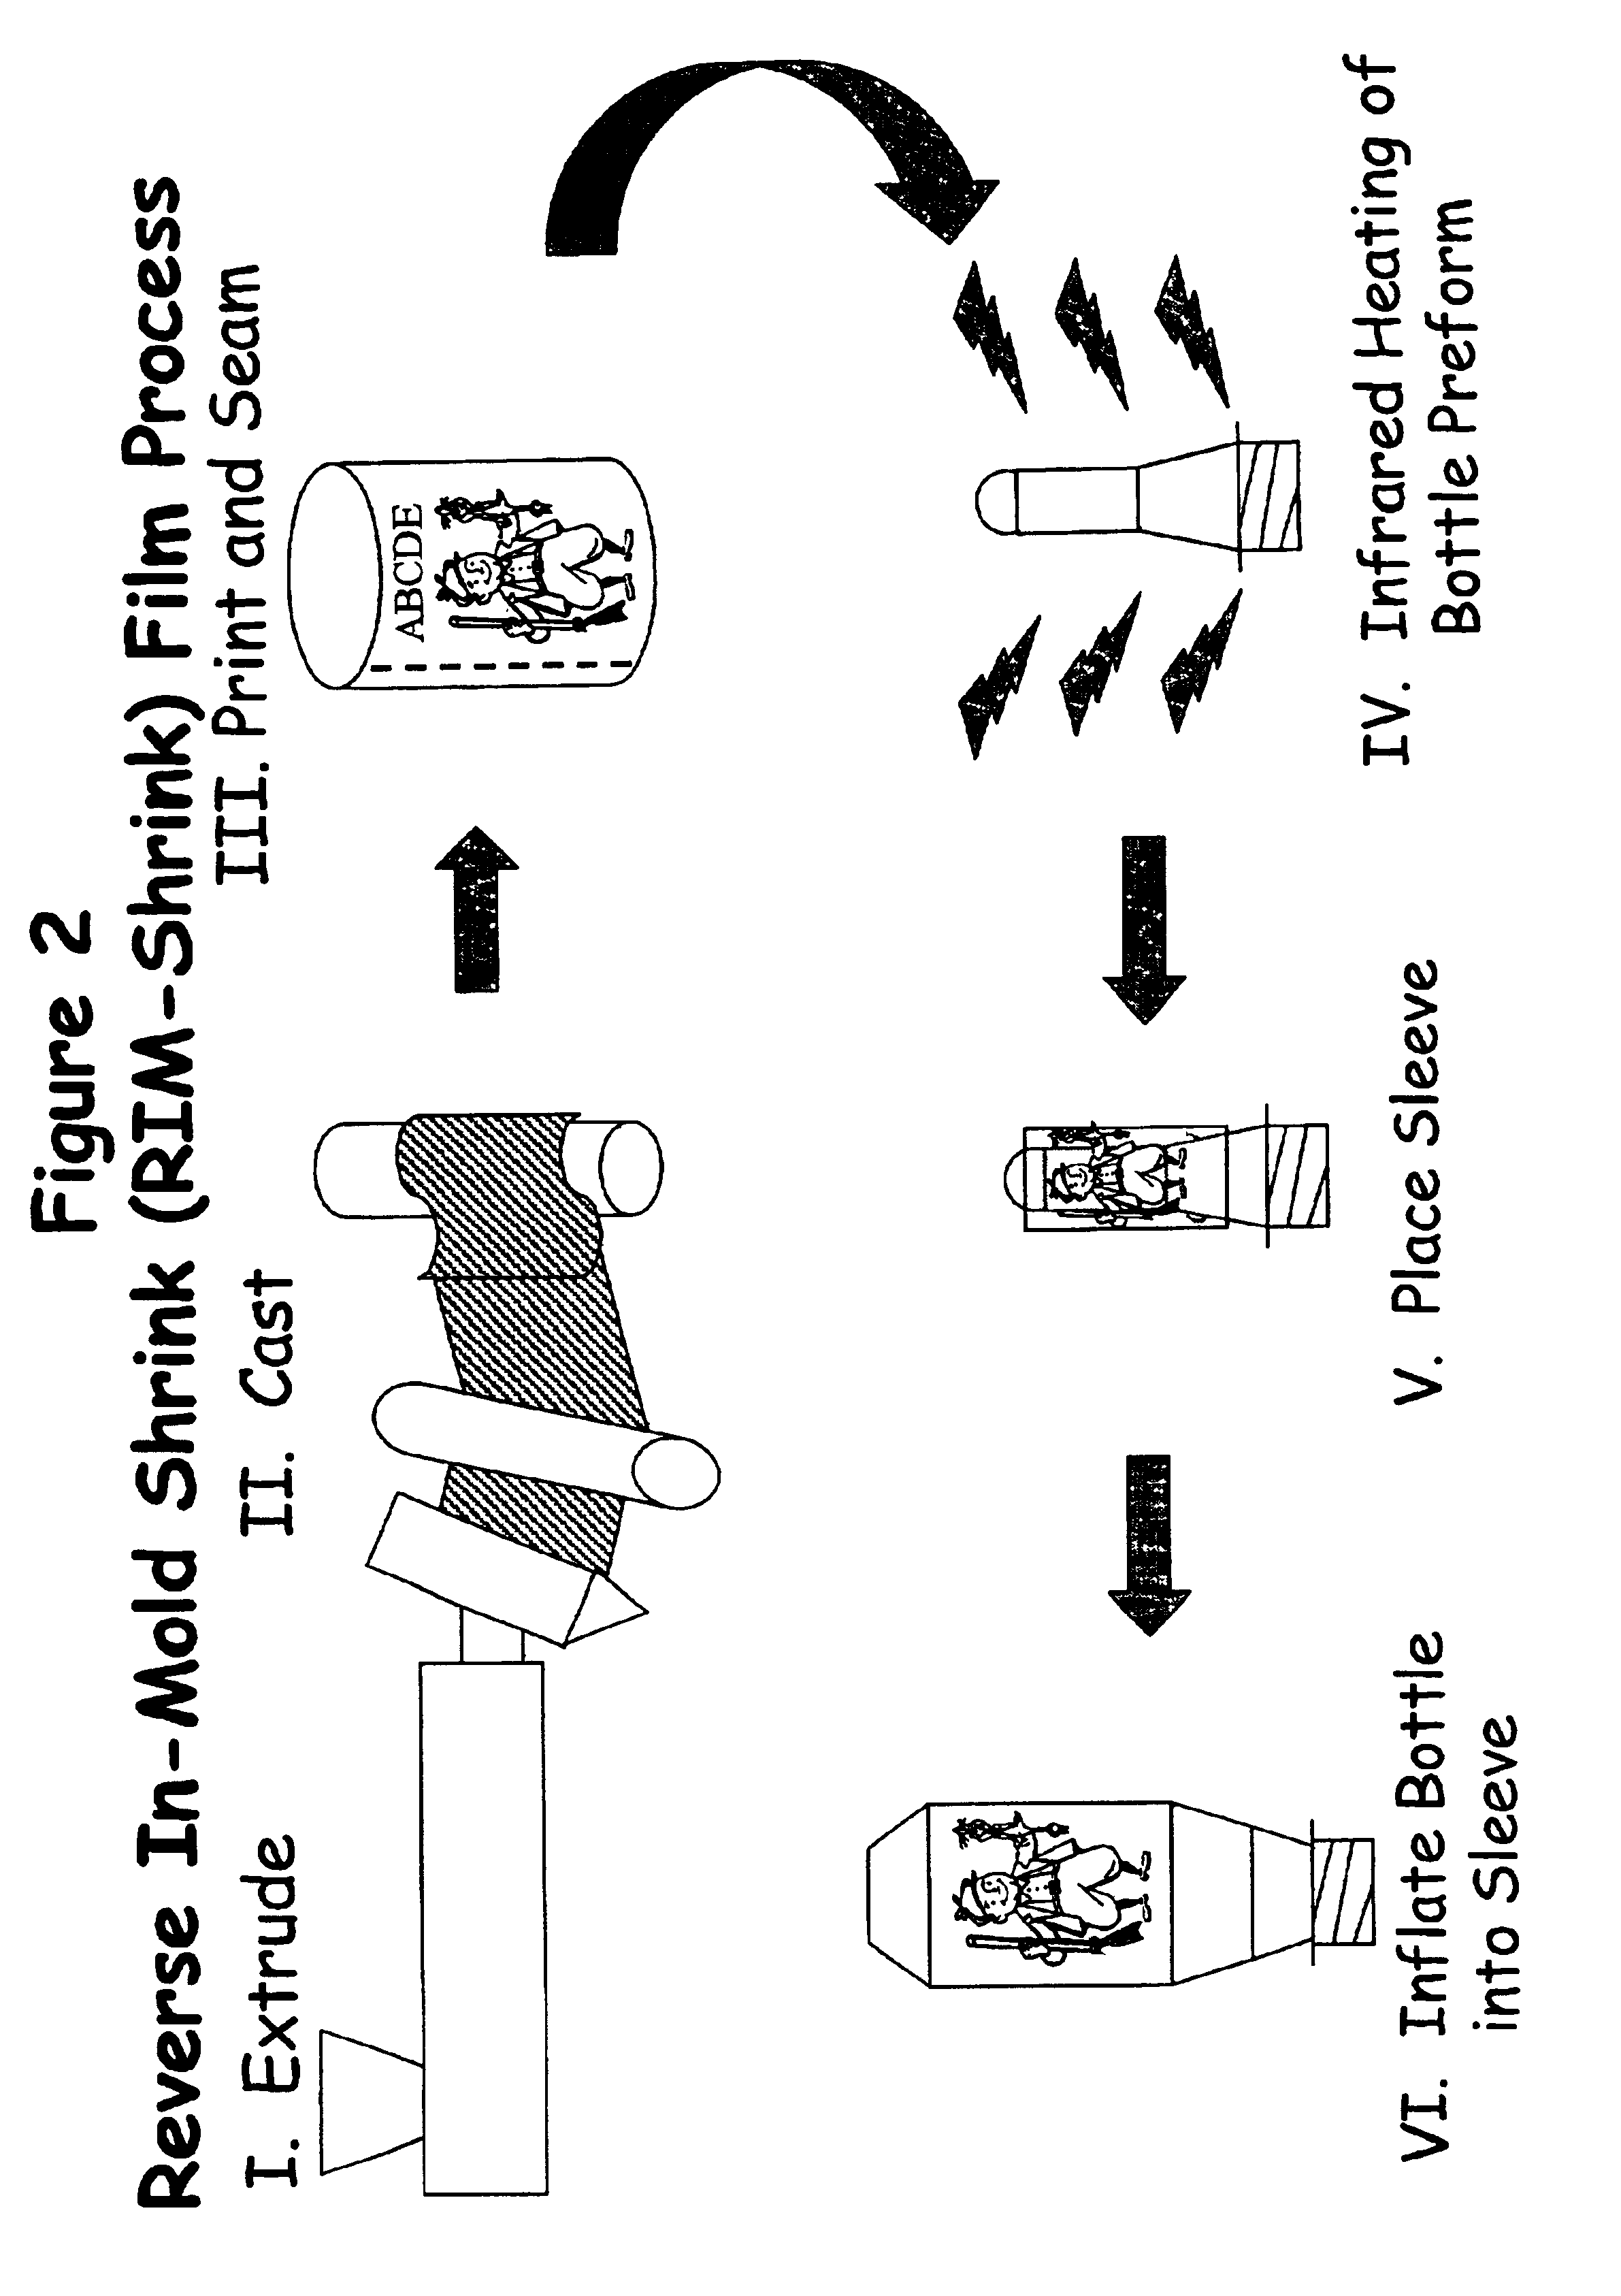 Process for making labeled containers using a stretch blow molding process